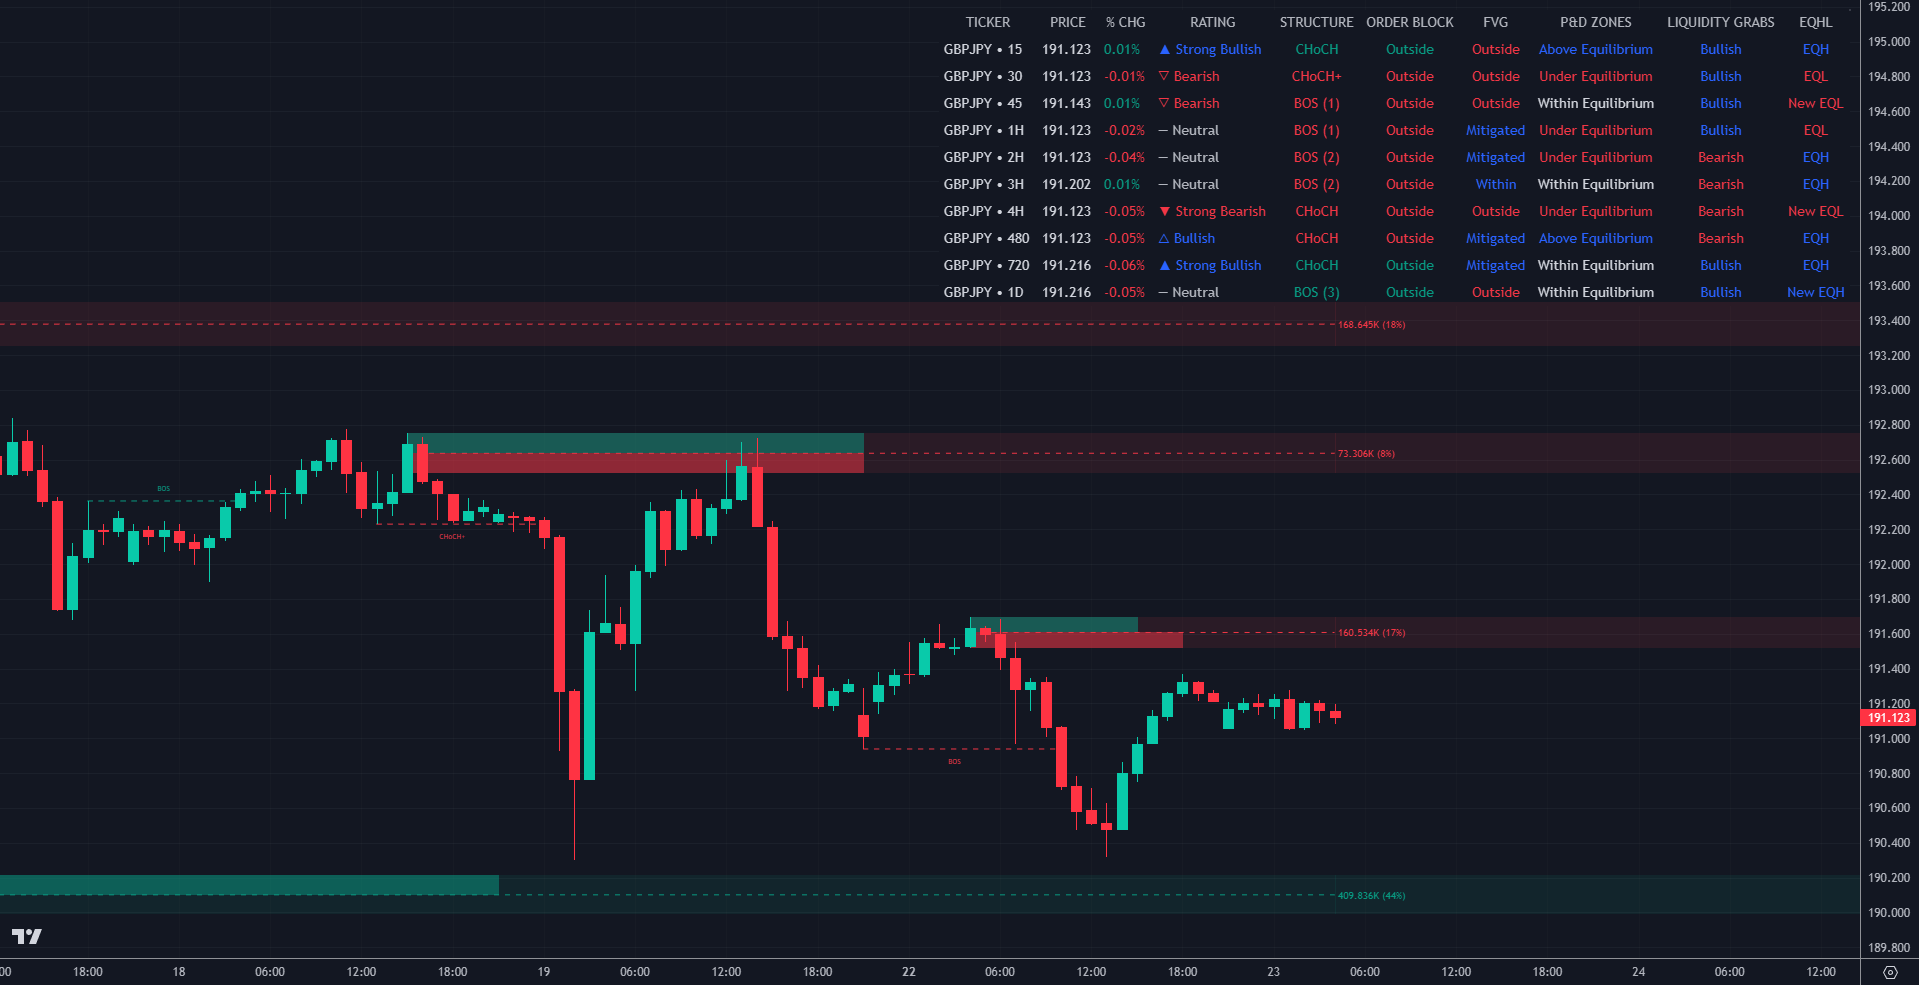 LuxAlgo trading chart showing screener functionality for any ticker and timeframe